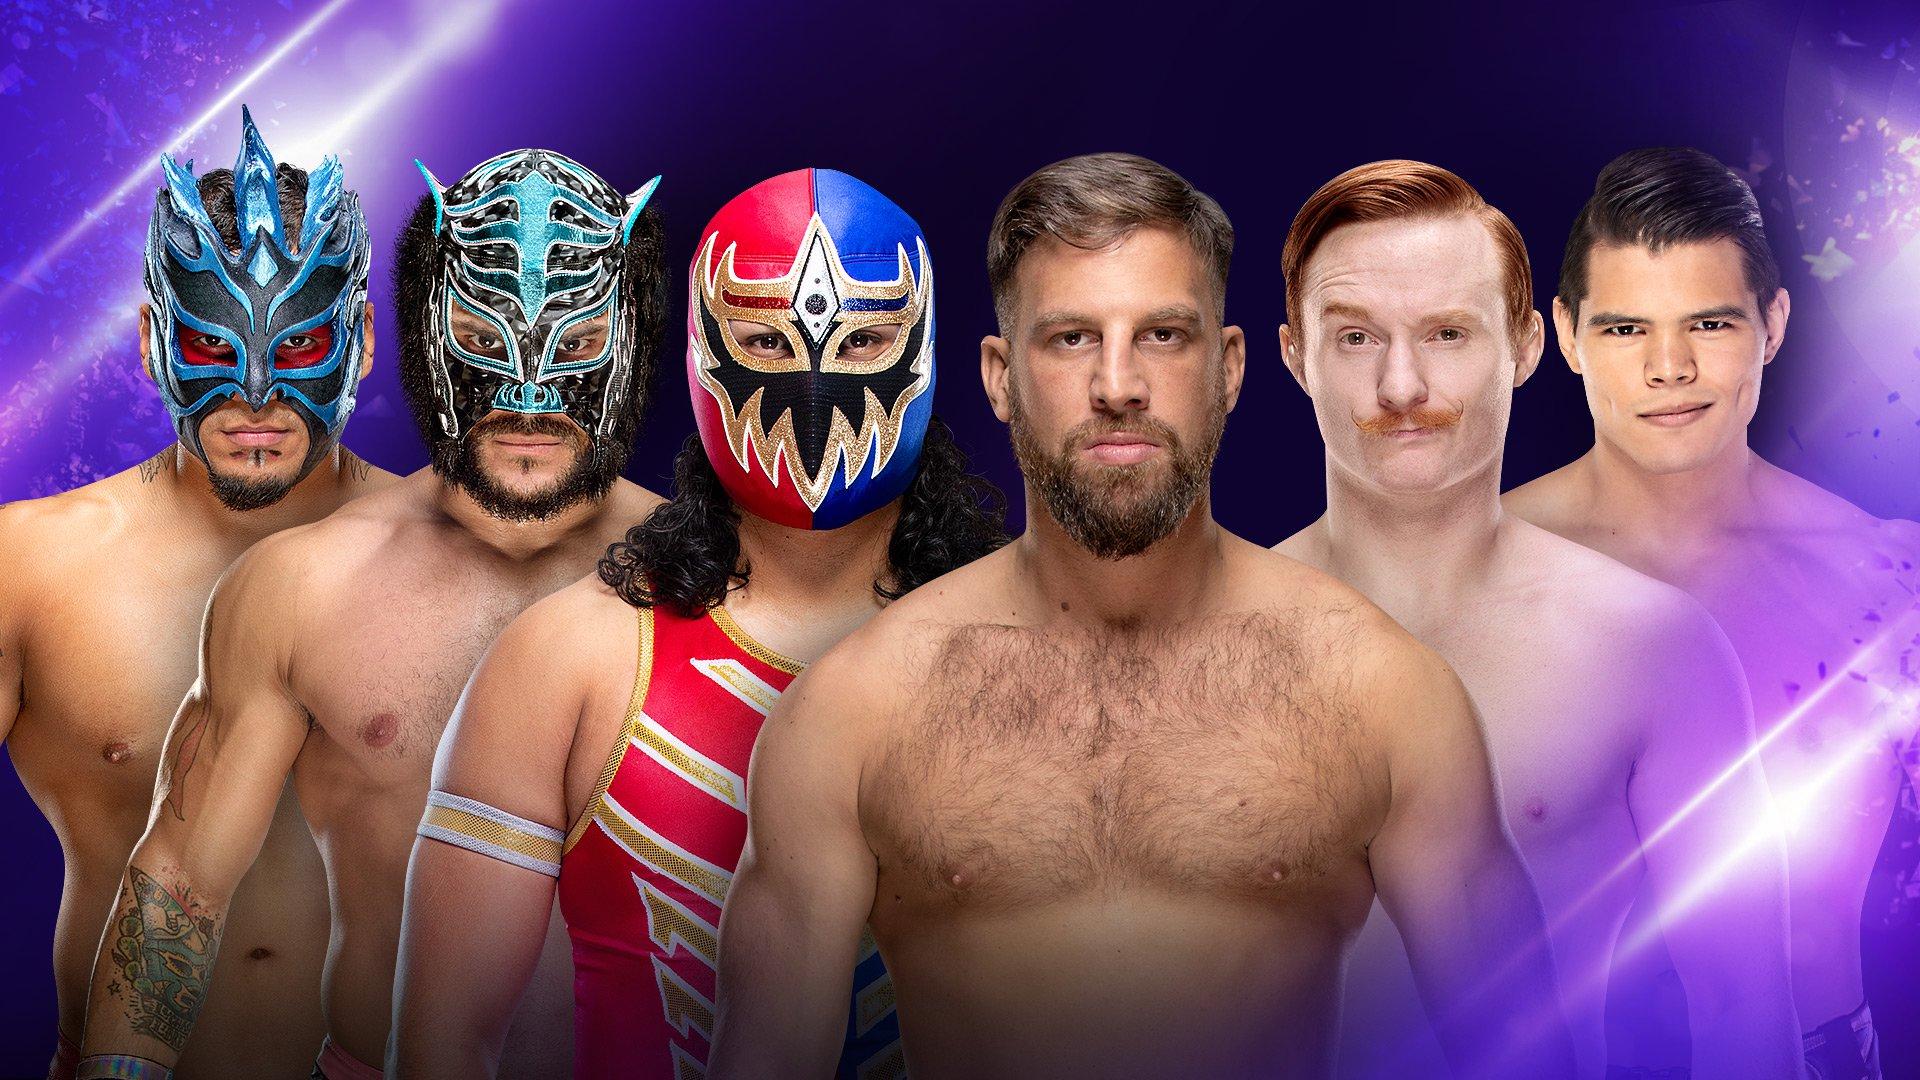 Live Results (03 26 19): Lucha House Party Vs Submission Commision